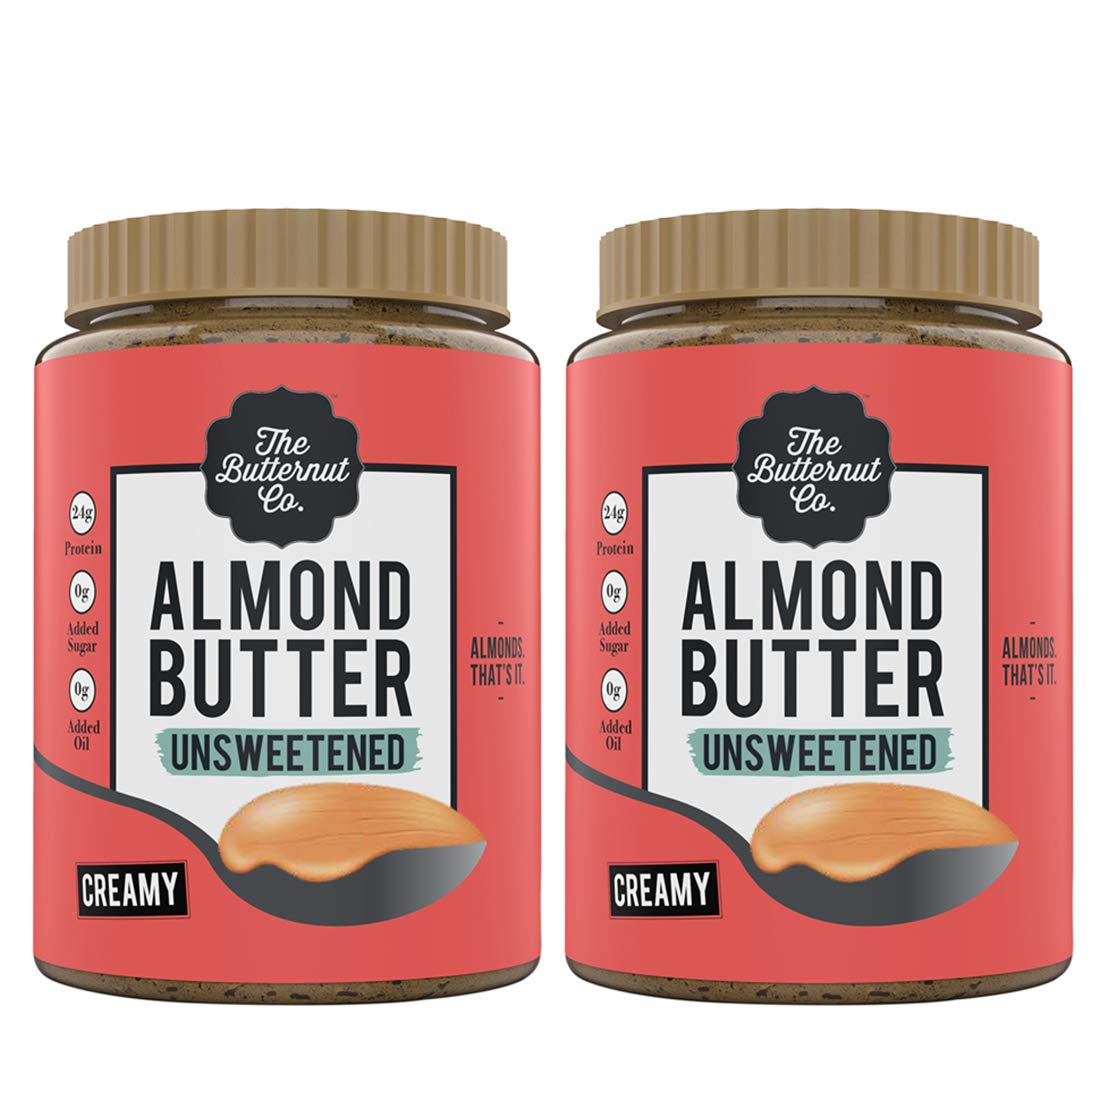 The Butternut Co. Almond Butter Unsweetened Creamy, 1 Kg (Pack Of 2)